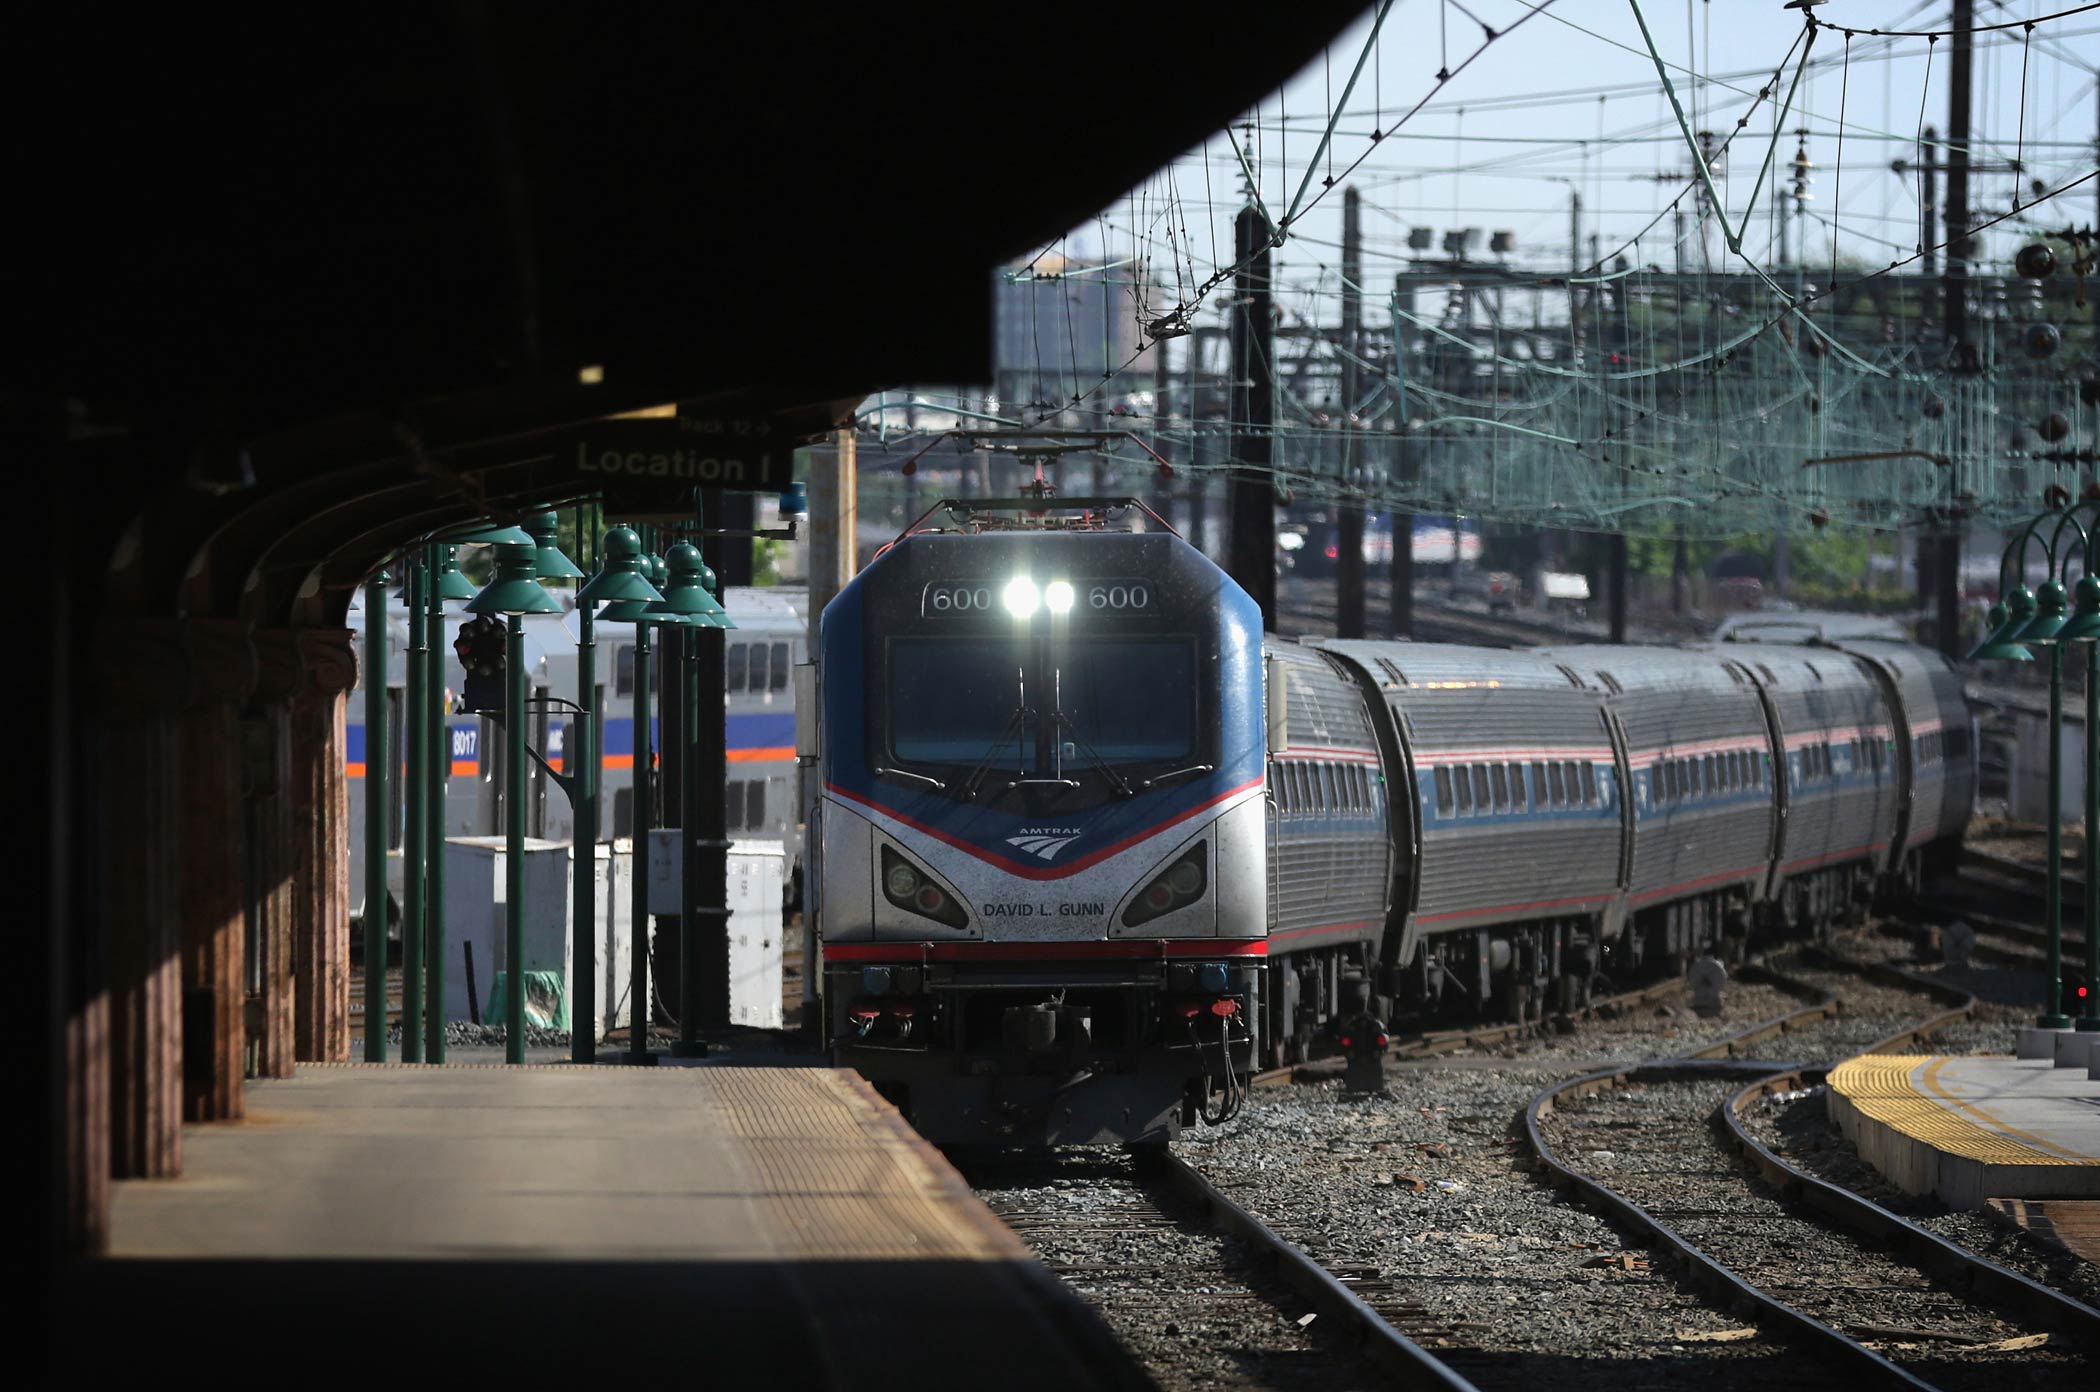 An Amtrak train arrives at Union Station on May 18, 2015 in Washington. (Alex Wong—Getty Images)